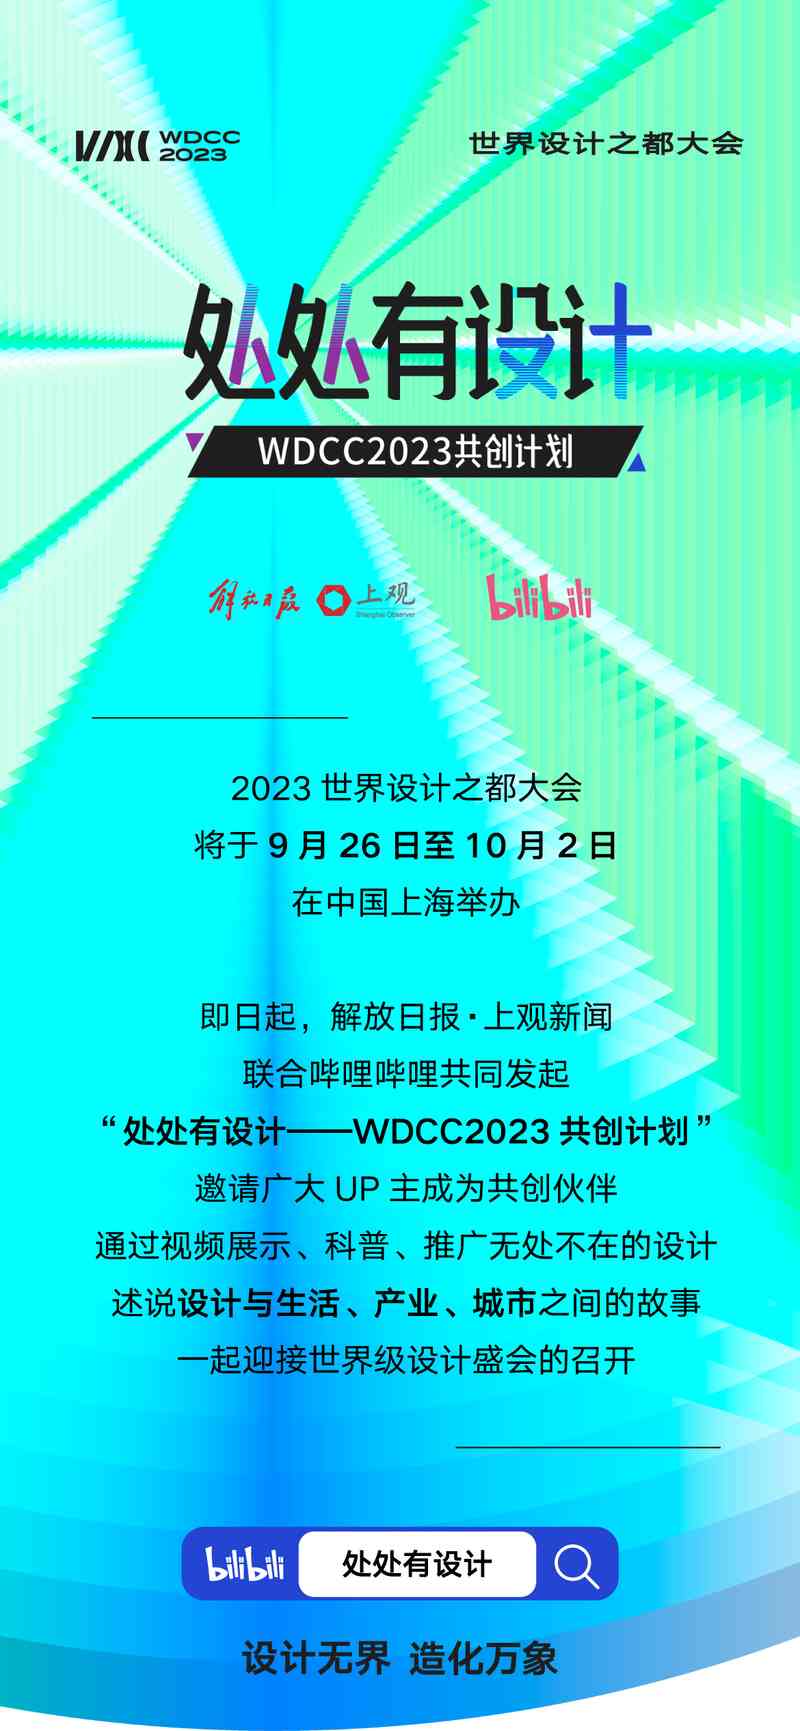 More than a ten thousand yuan bonus! "Design Everywhere - WDCC2023 Co Creation Plan" awaits you to participate in the city | design | co creation